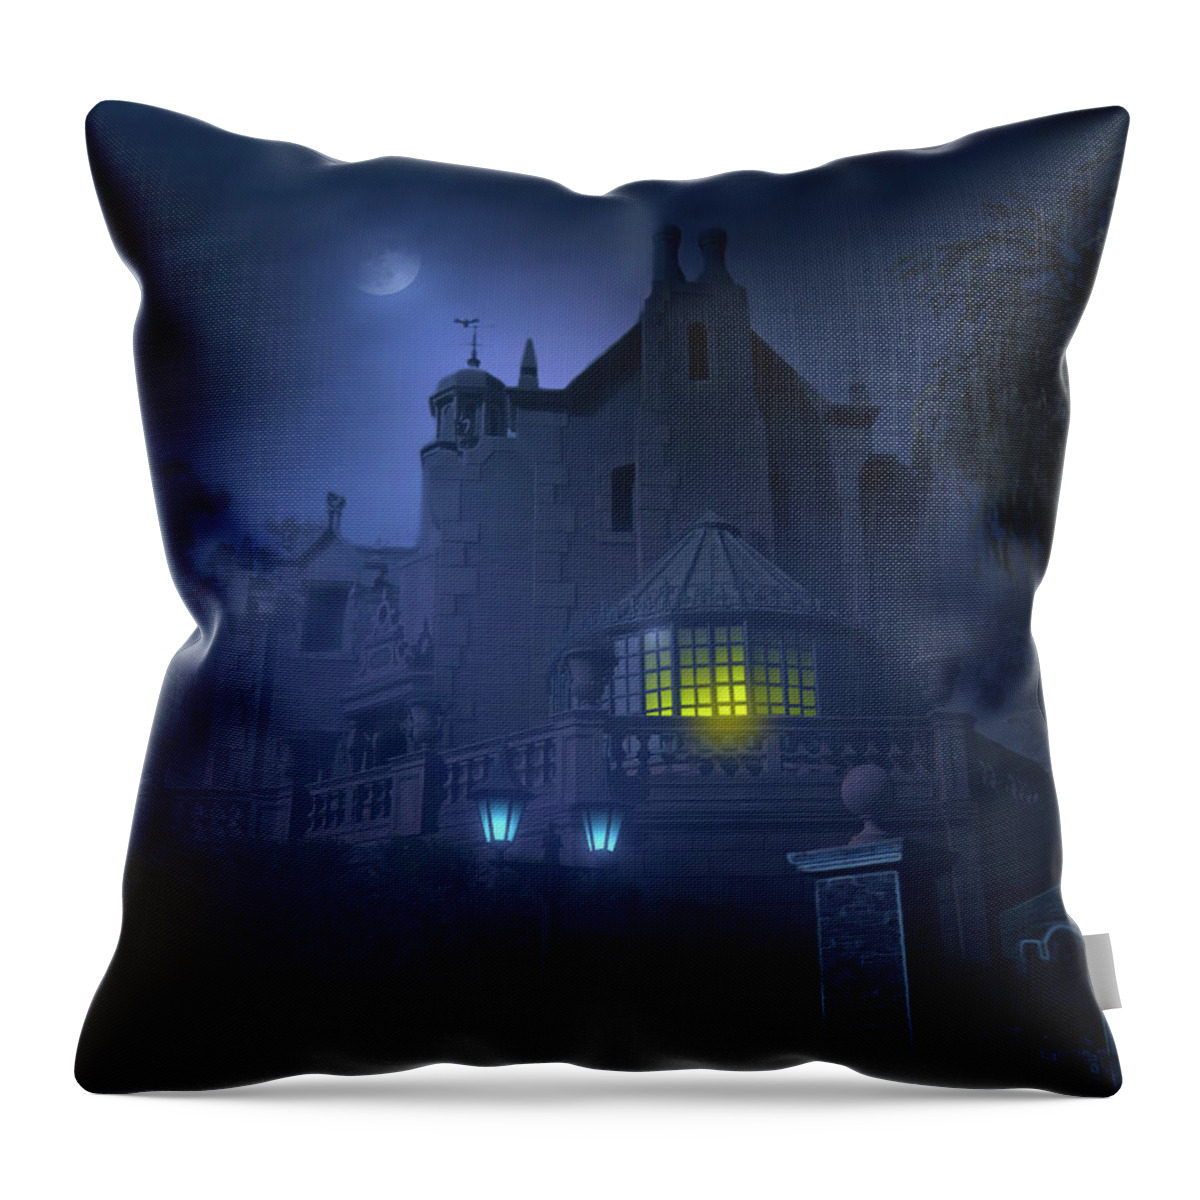 Magic Kingdom Throw Pillow featuring the photograph Ghost House by Mark Andrew Thomas